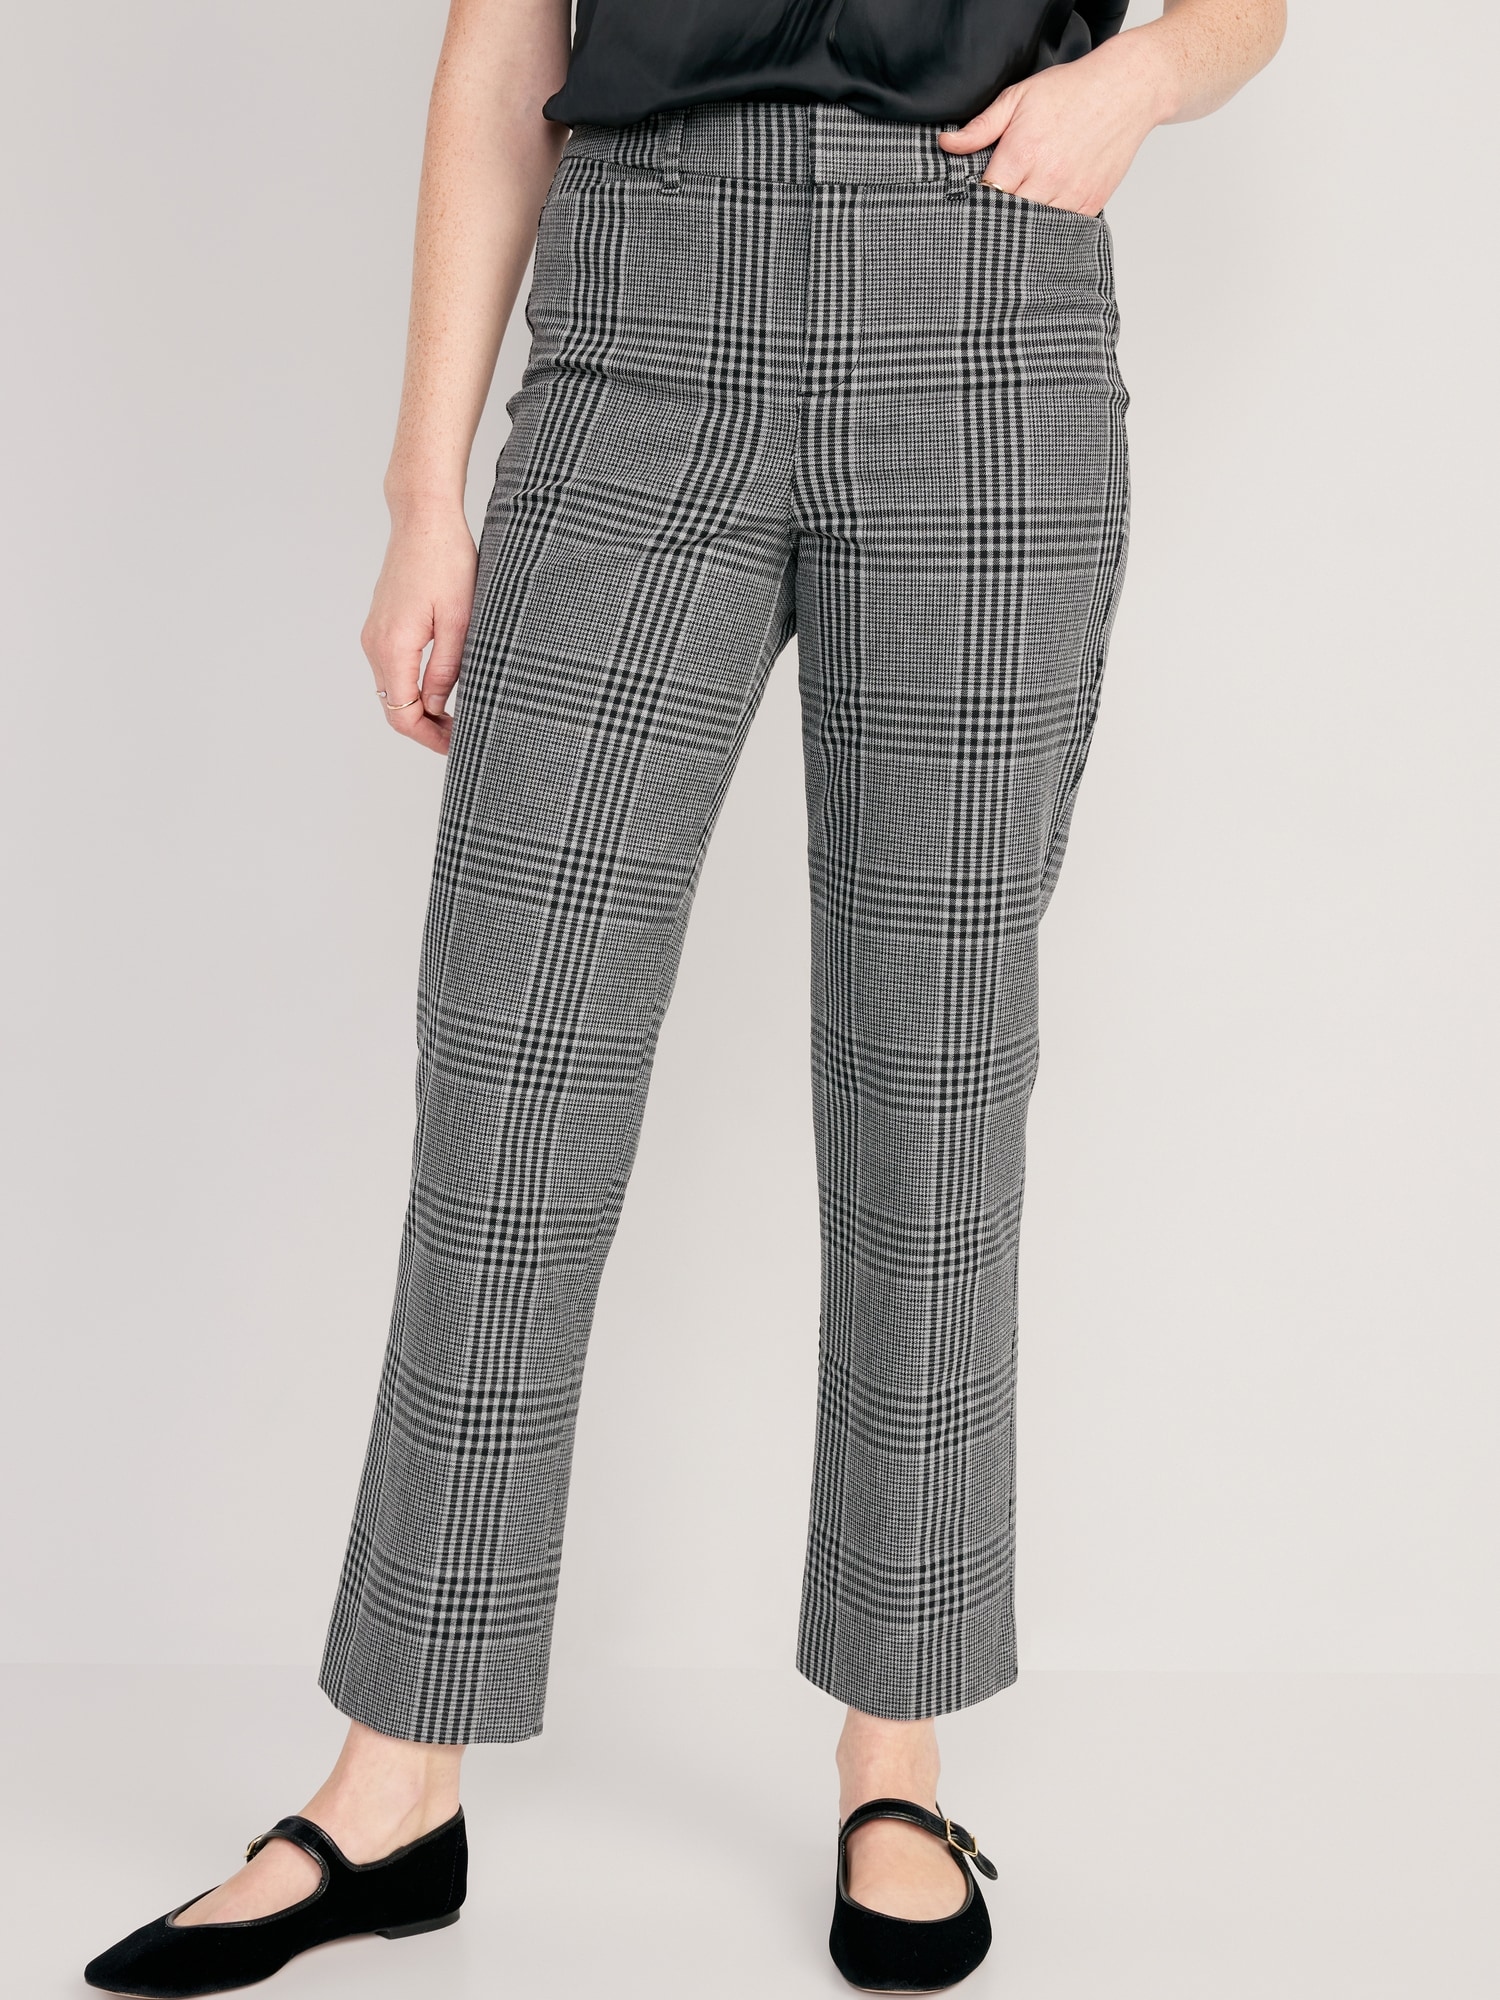 High-Waisted Pixie Straight Ankle Pants | Old Navy